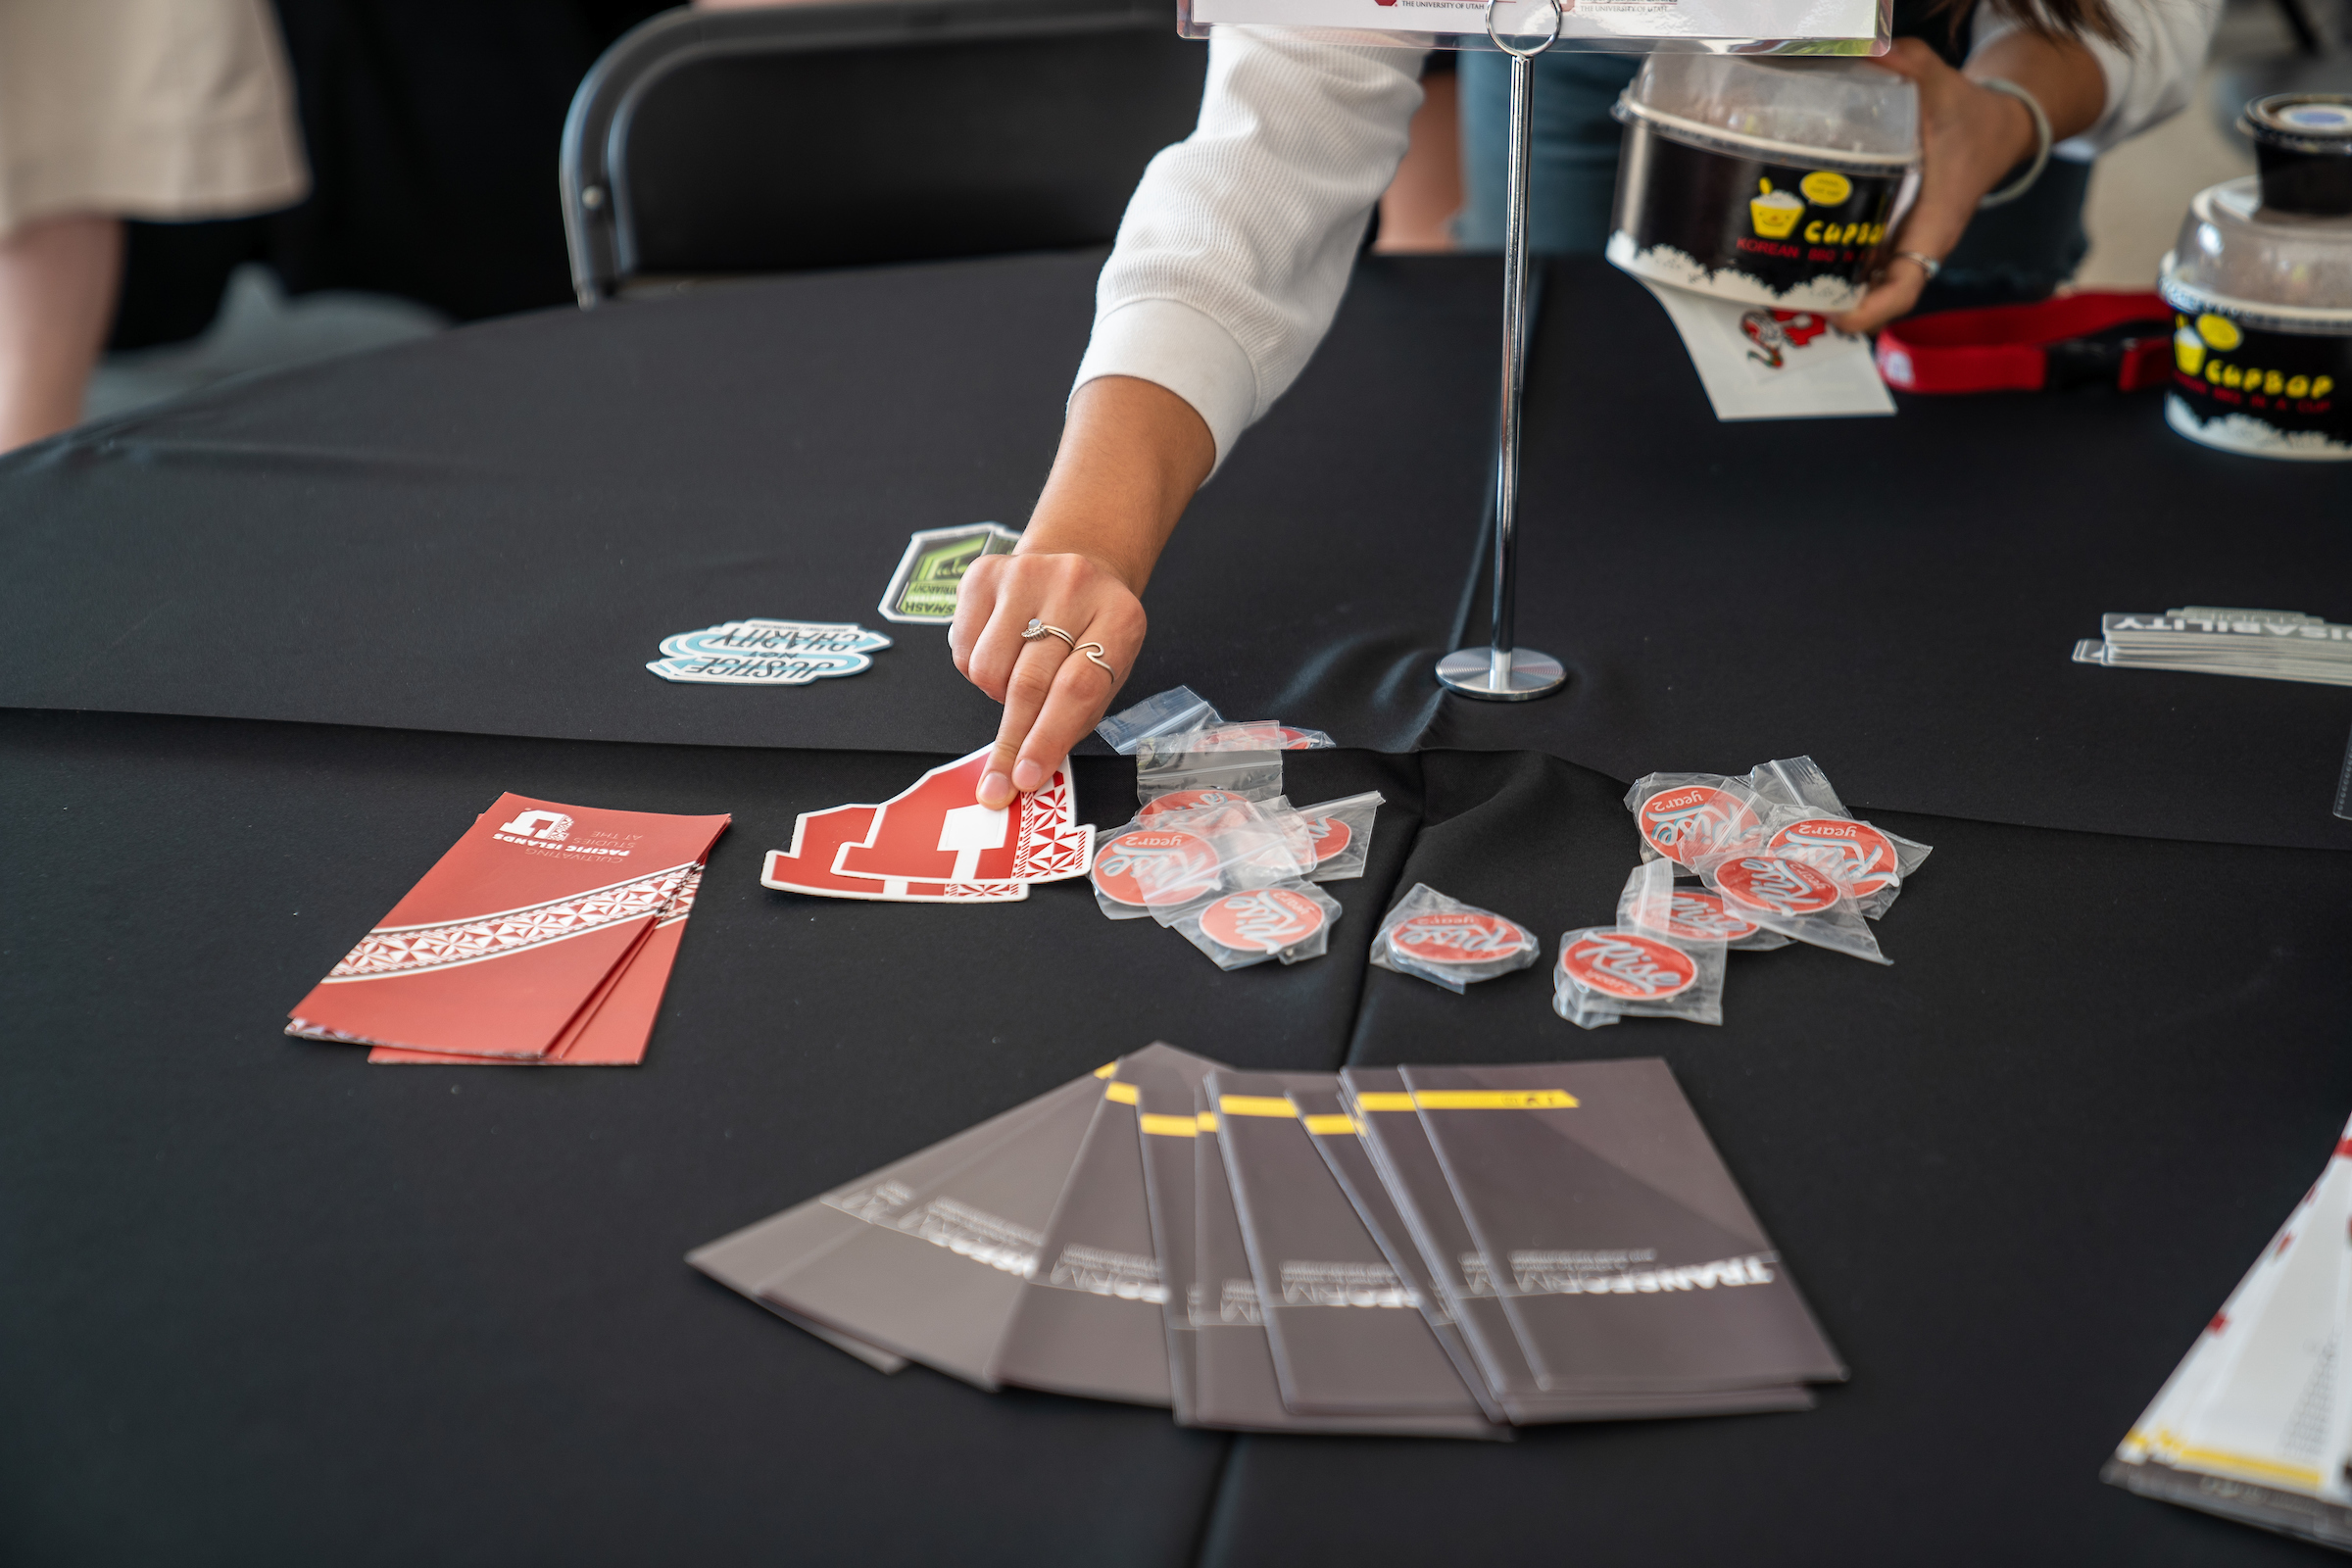 tabletop with Transform's stickers and brochures